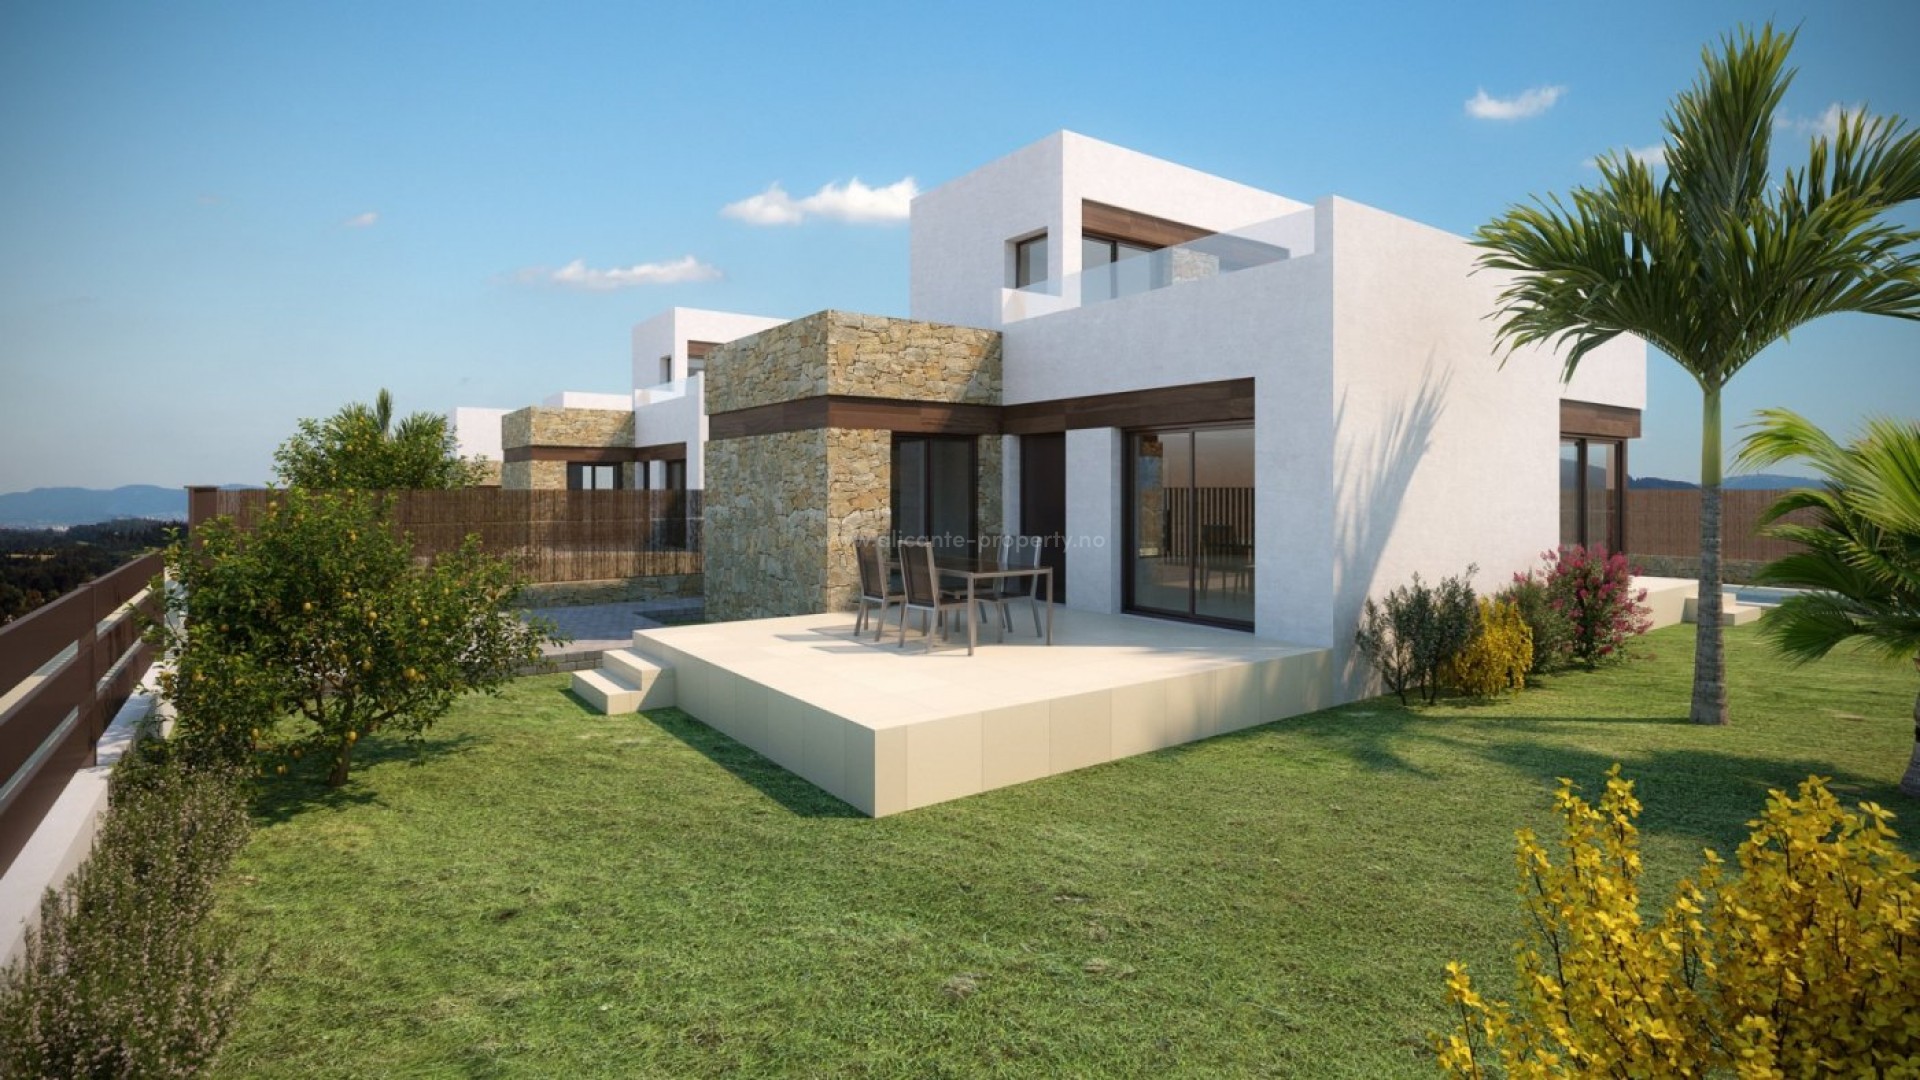 Brand new houses/villas in Balcon de Finestrat, 3 bedrooms, 2 bathrooms, 1 or 2 floors, large gardens with pool, parking on site